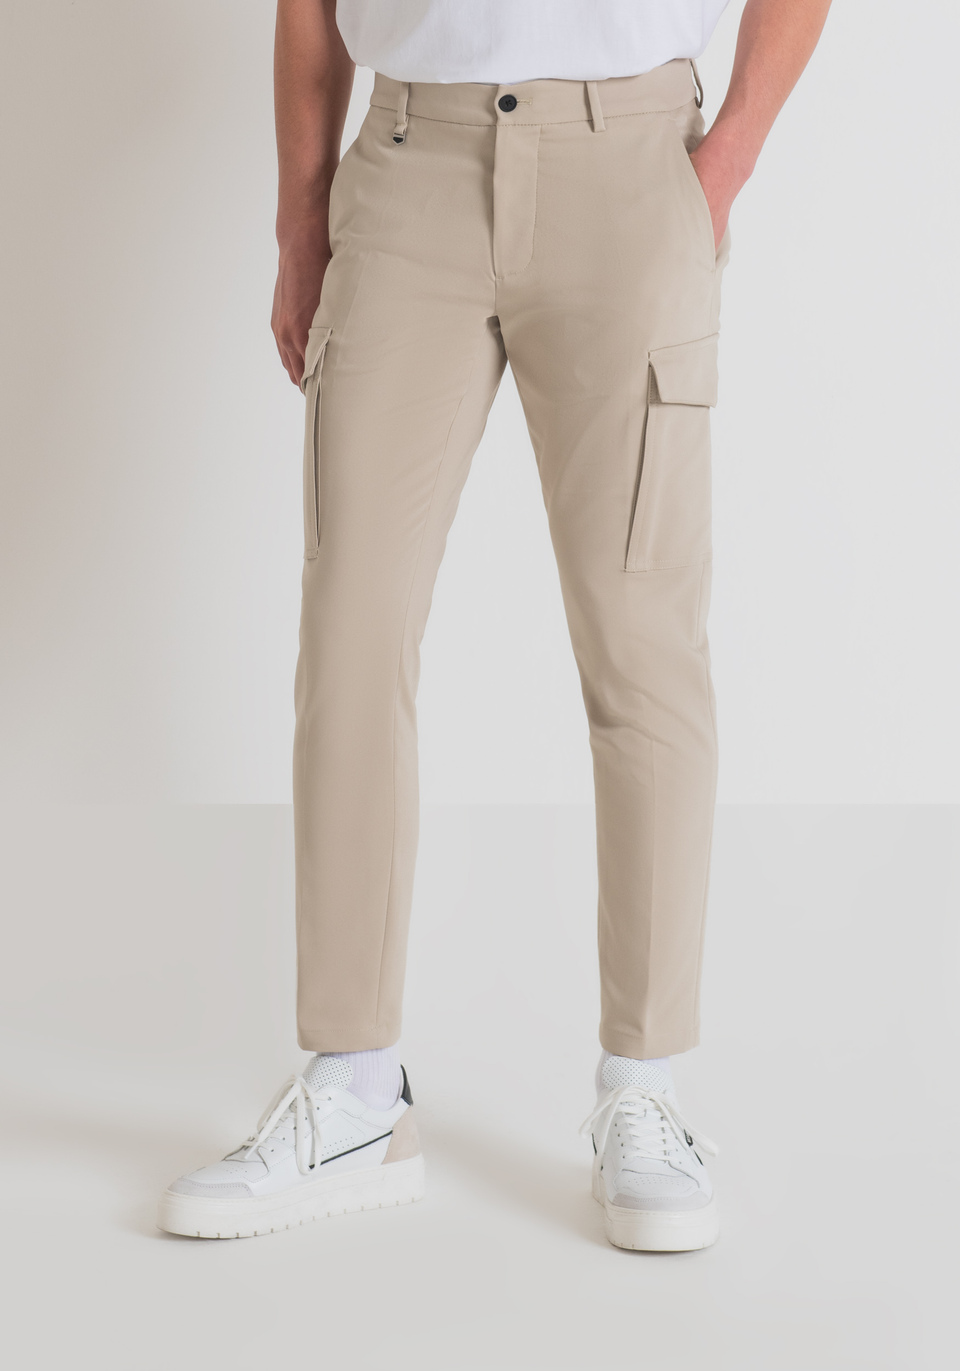 "BJORN" SKINNY FIT CARGO TROUSERS IN STRETCH COTTON BLEND FABRIC - Antony Morato Online Shop